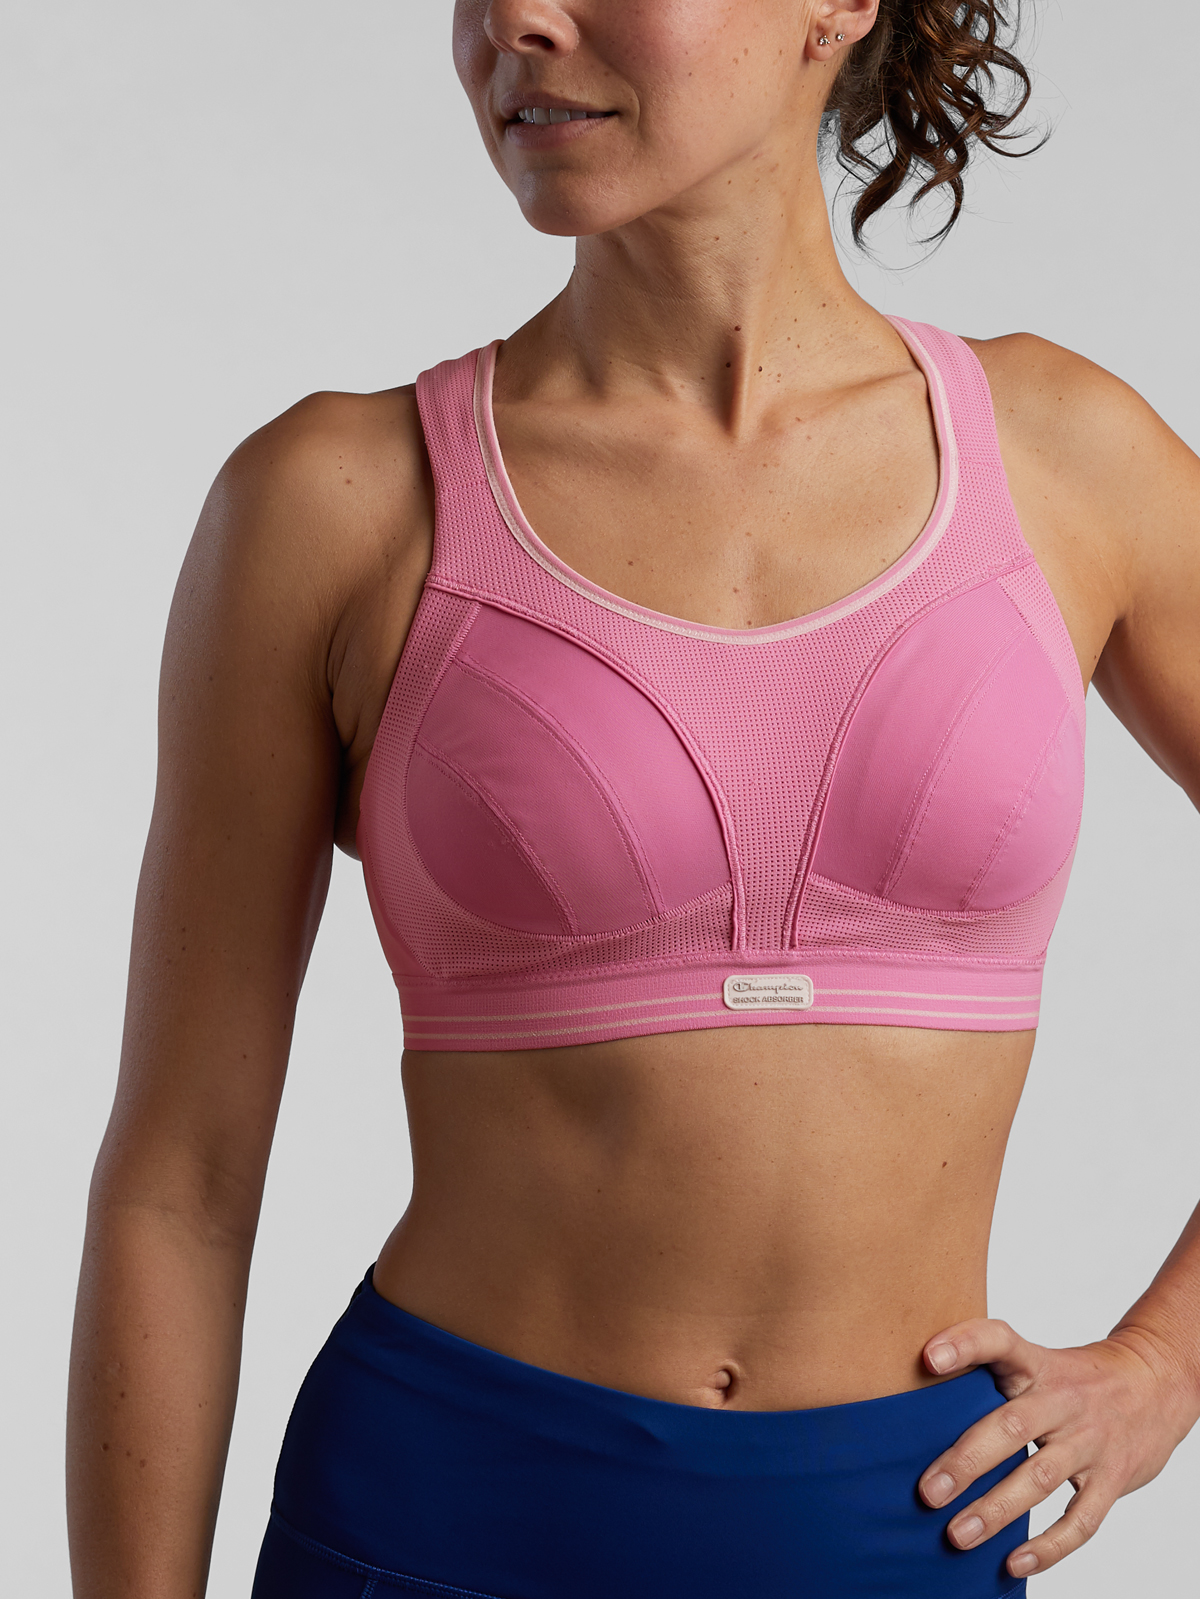 Better Sports Bras For Busty Broads - Title Nine Email Archive